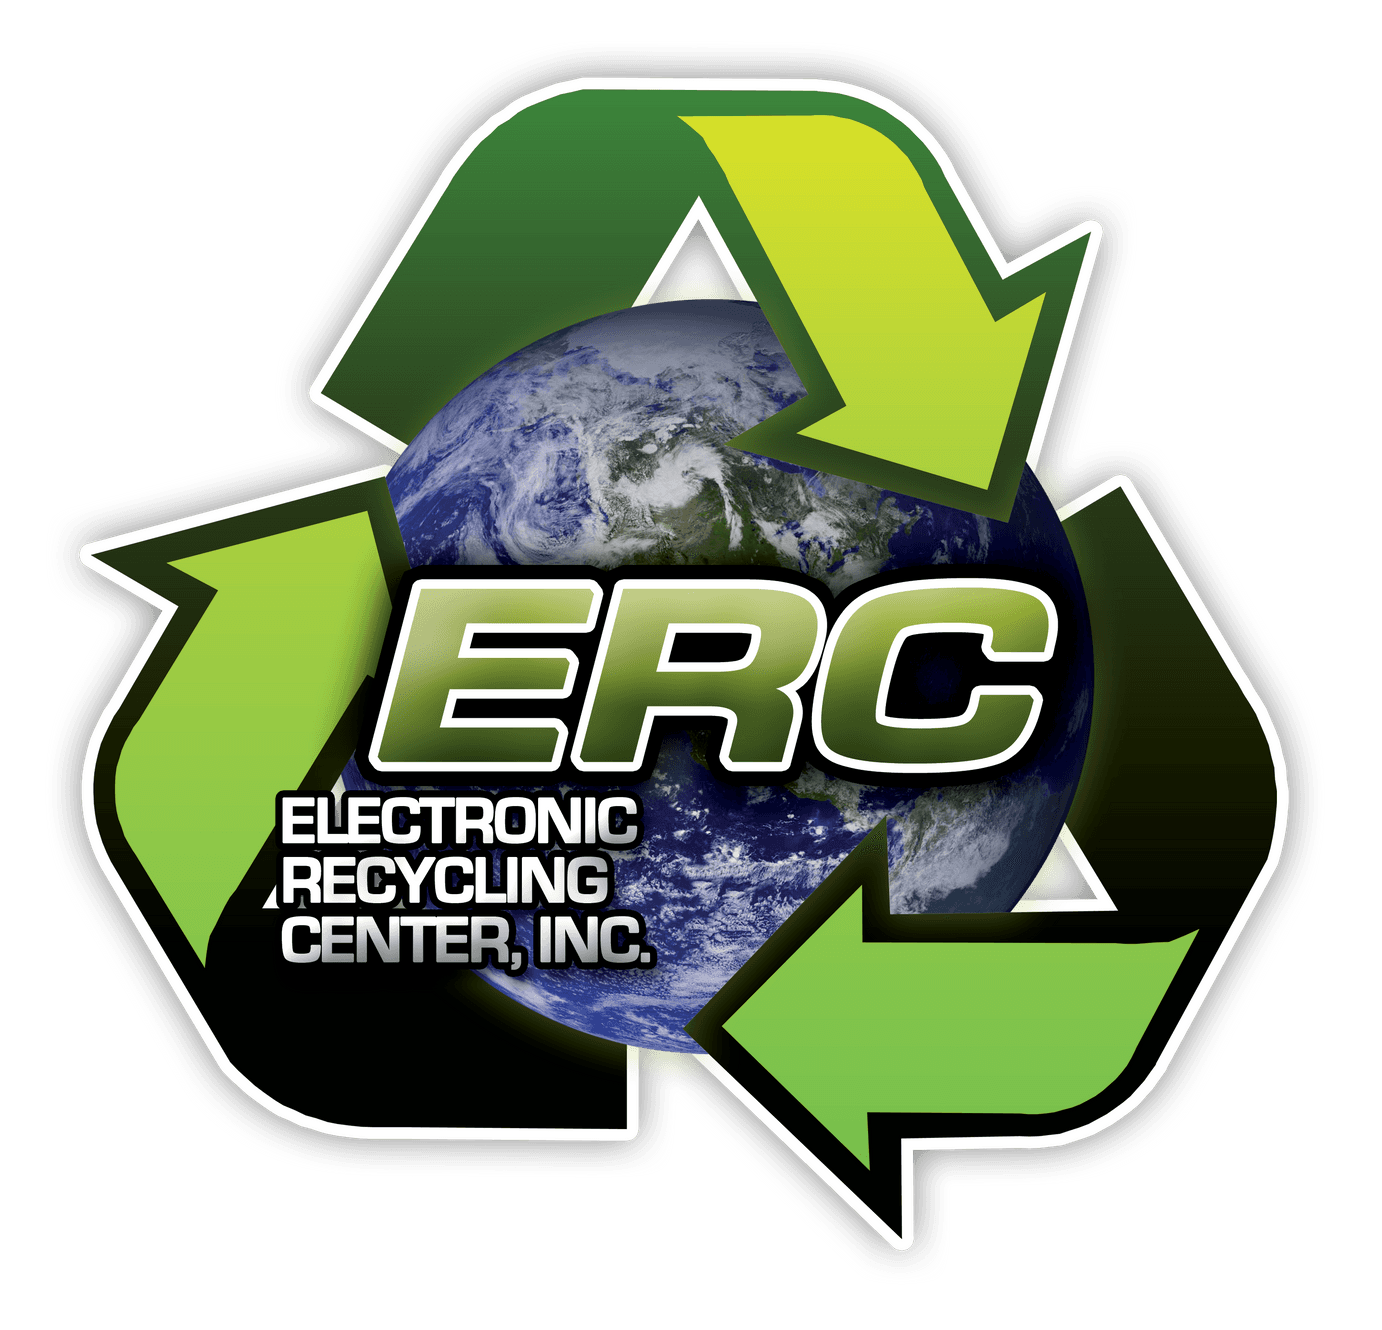 Product Services | Electronic Recycling Center, Inc image